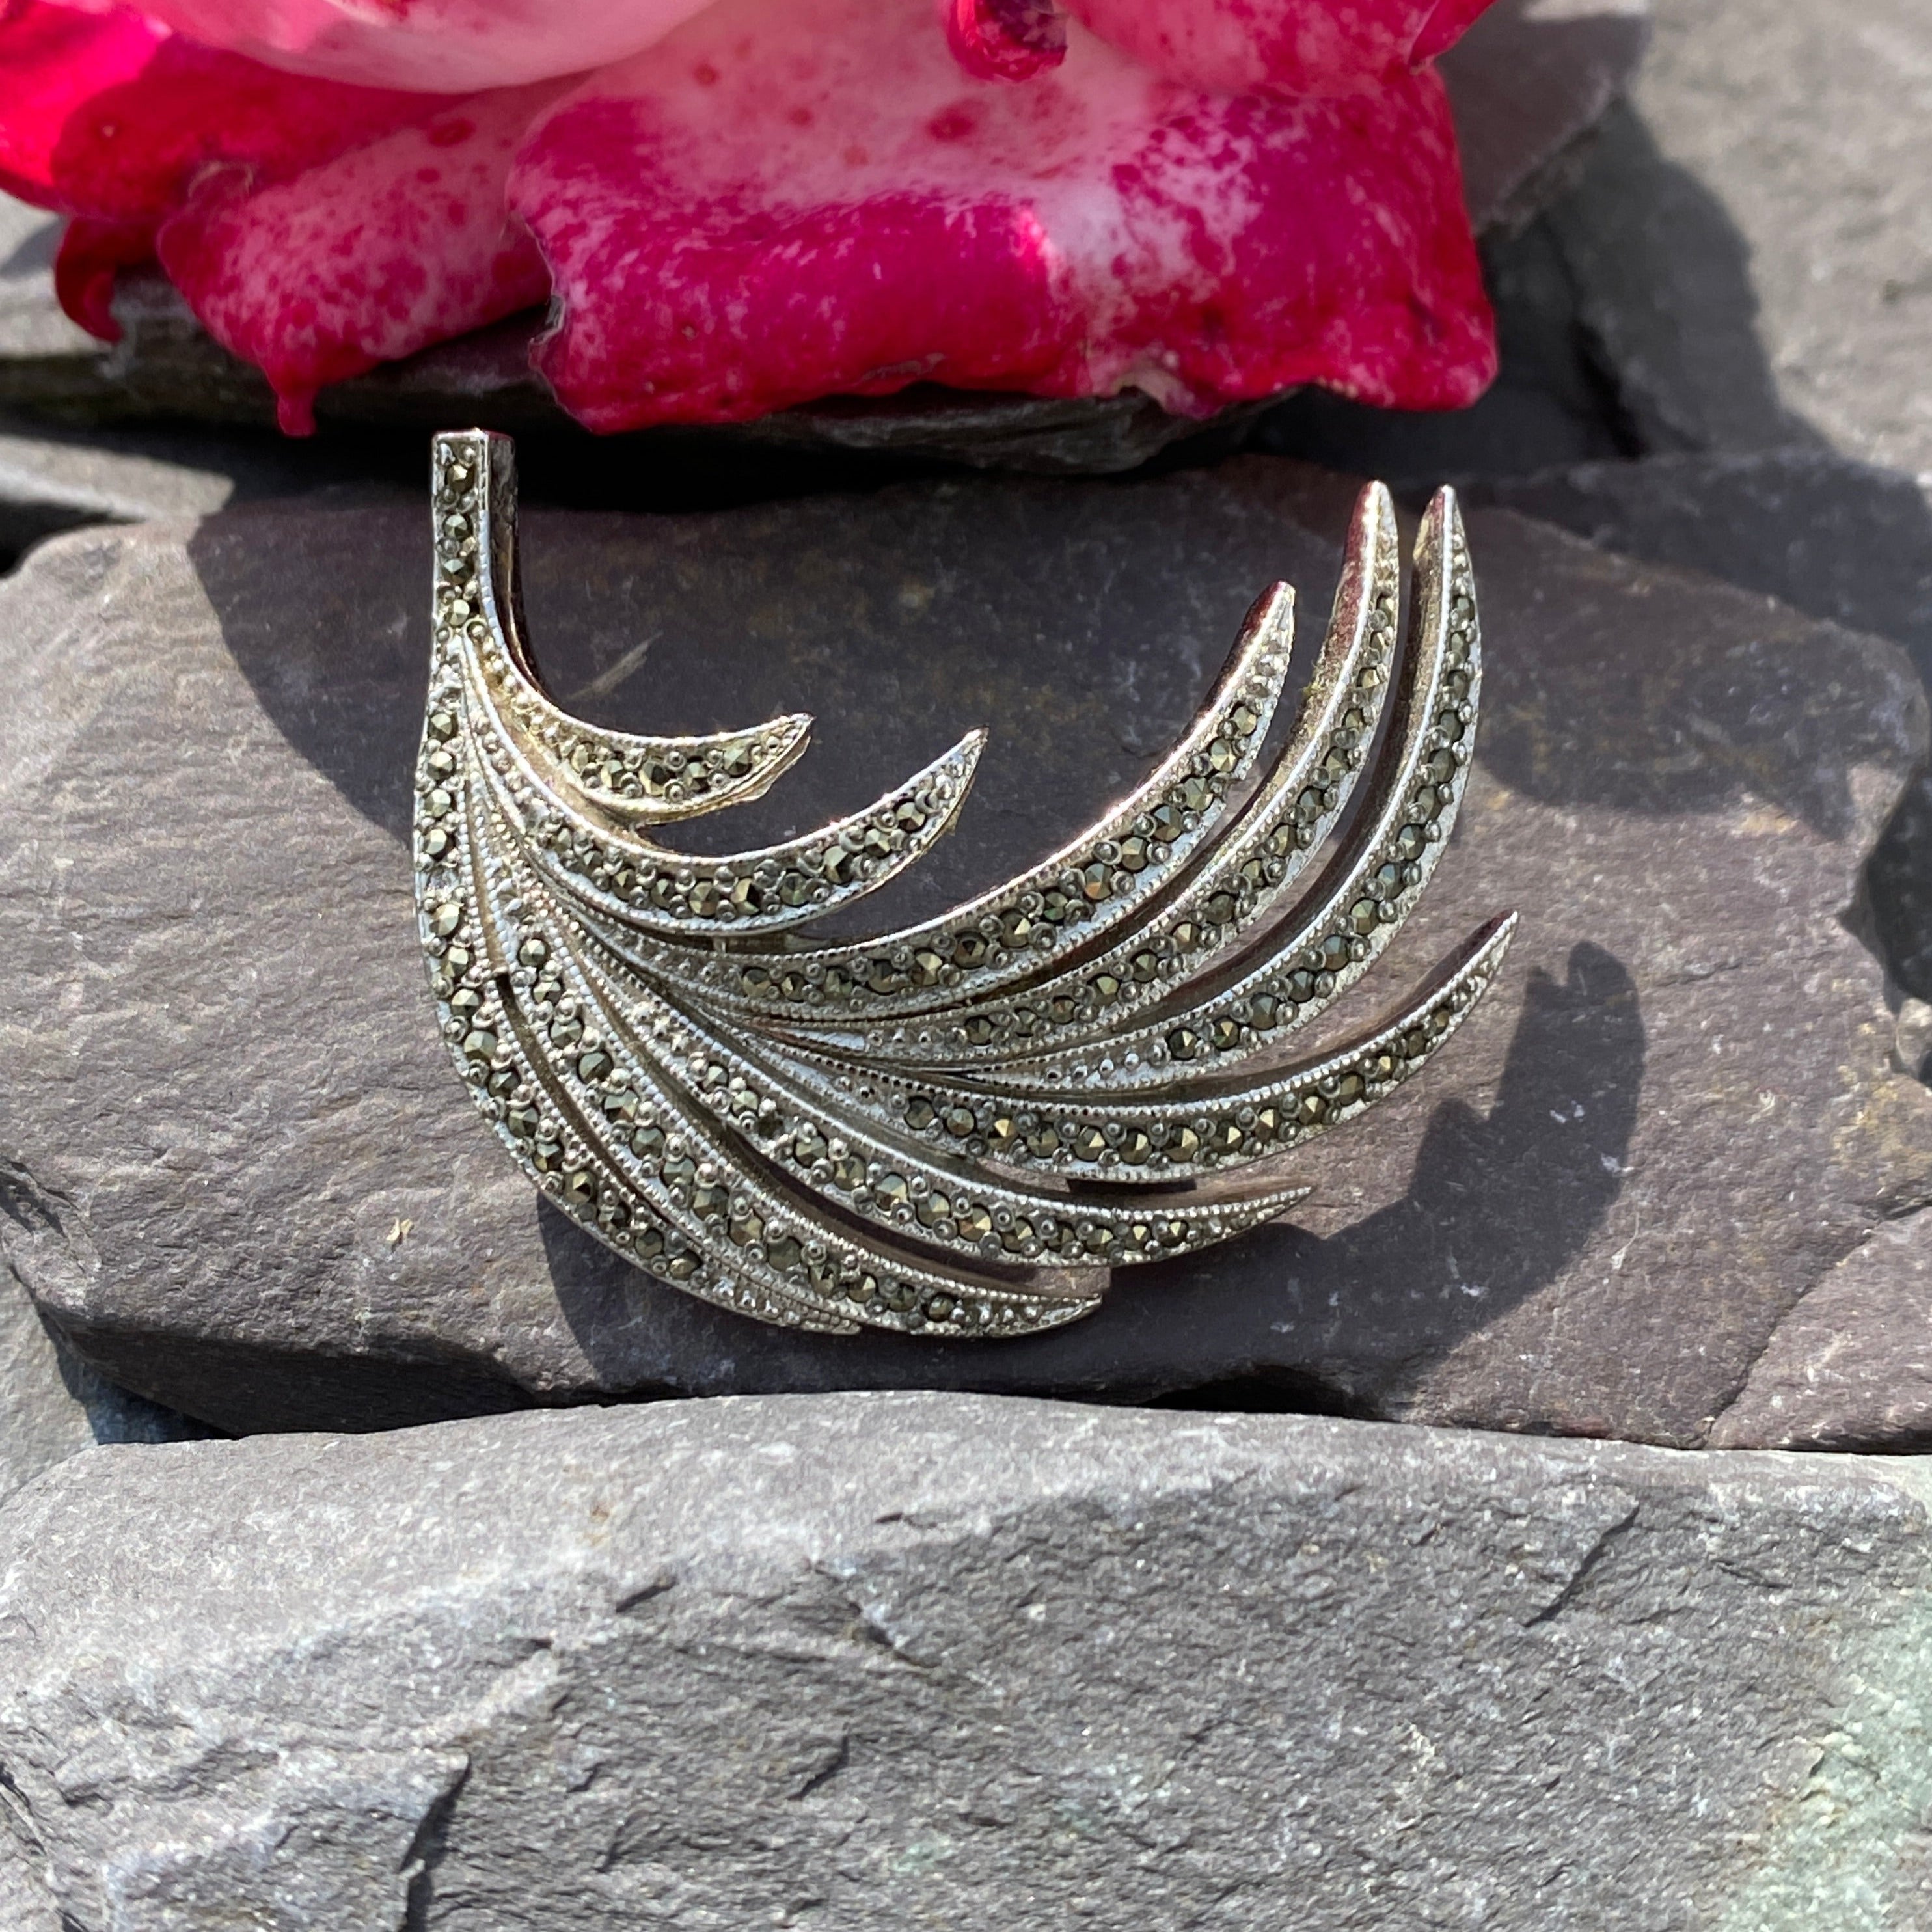 Sphinx Chrome Plated Marcasite Feather Brooch.